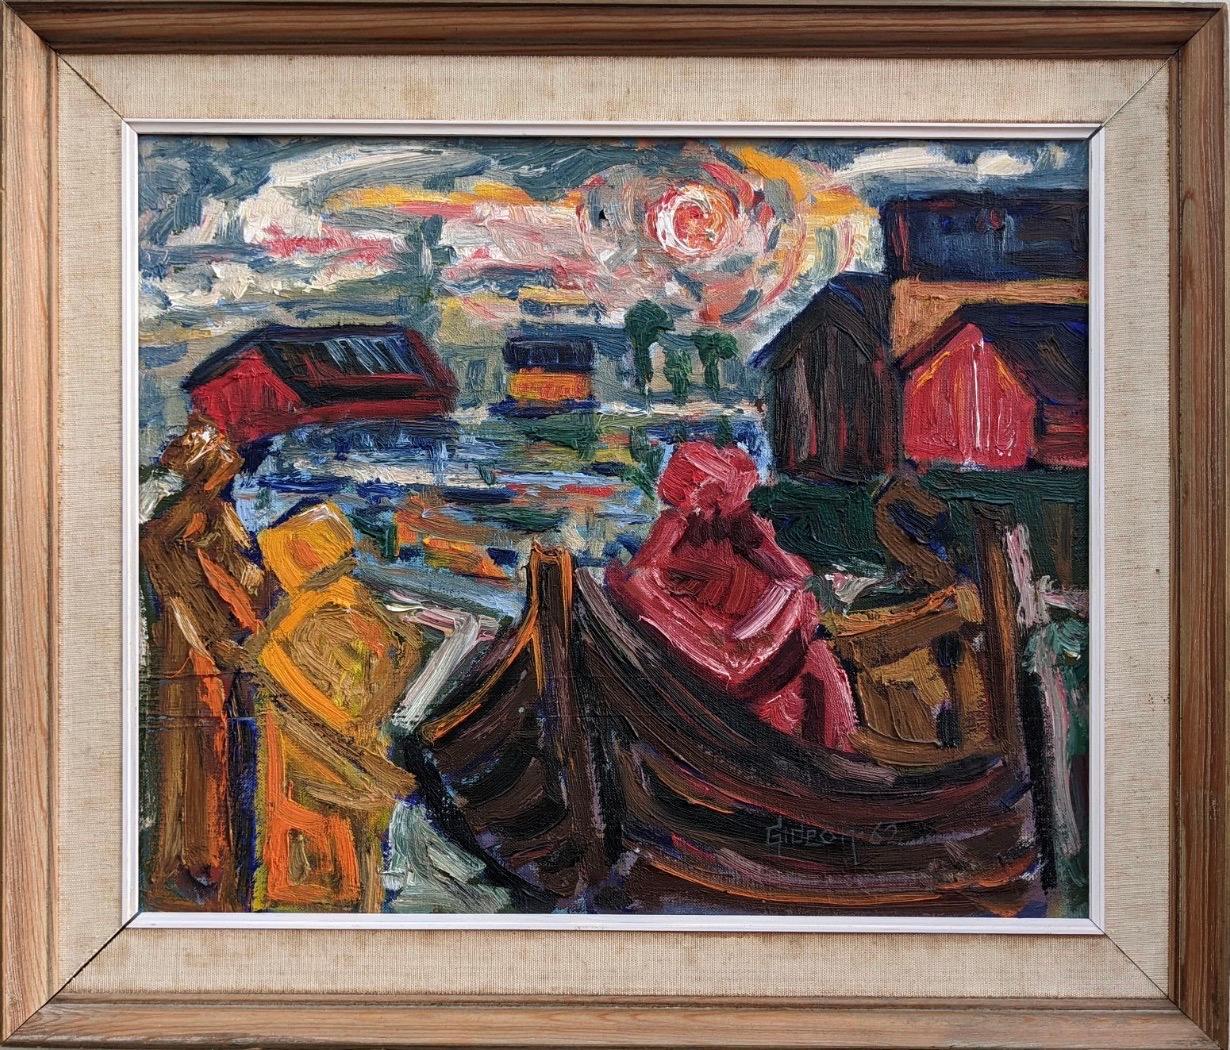 Unknown Figurative Painting - 1962 Vintage Modern Swedish Expressionist Framed Oil Painting - Vivid Lake